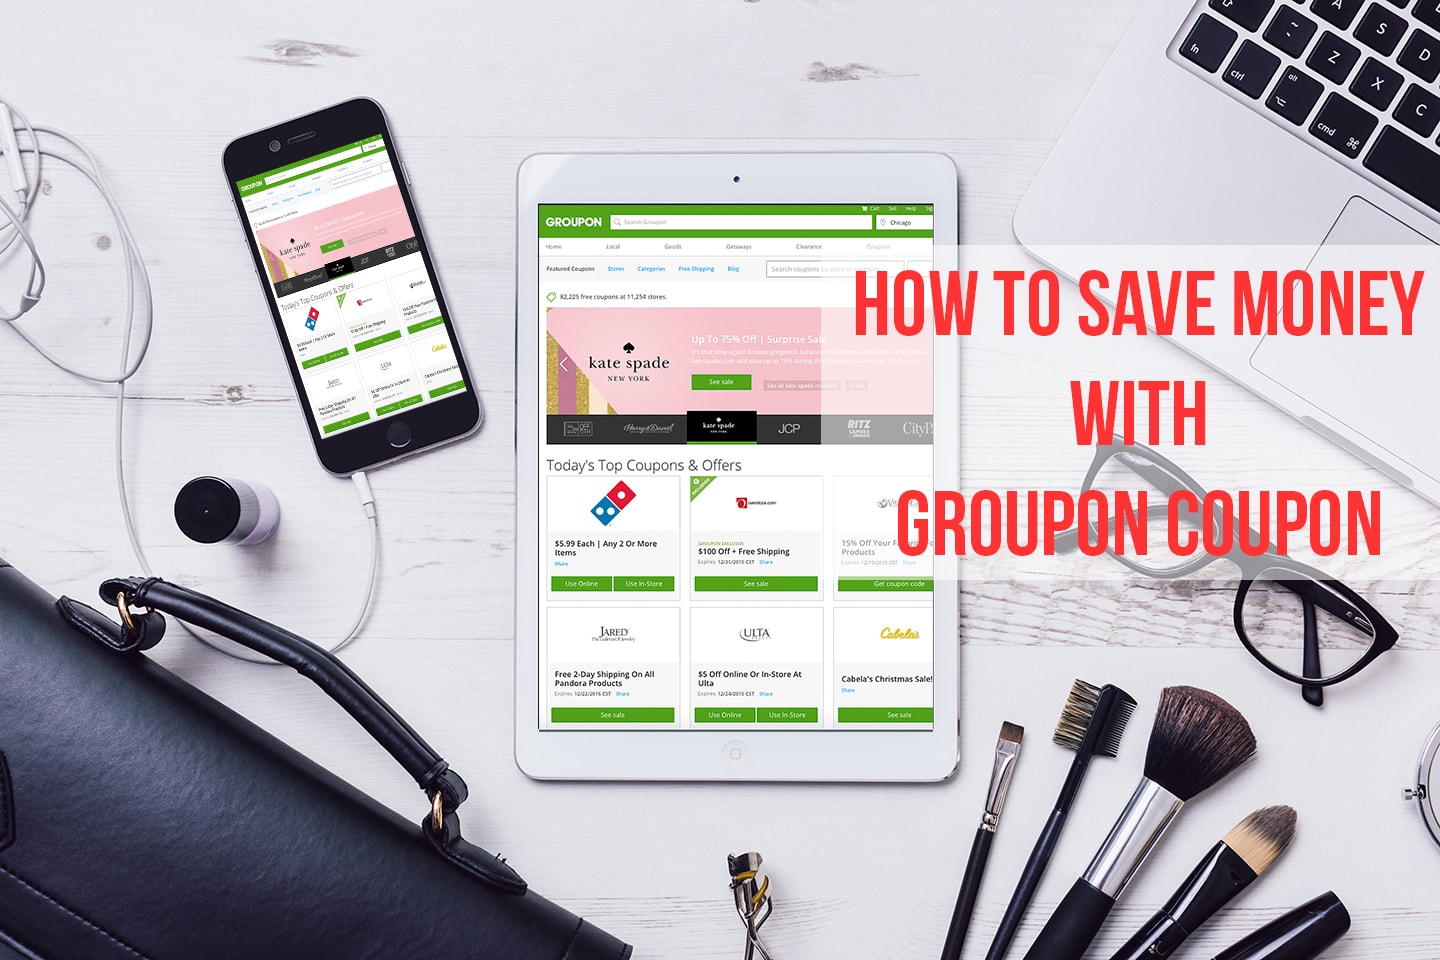 How To Save Money With Groupon Coupon